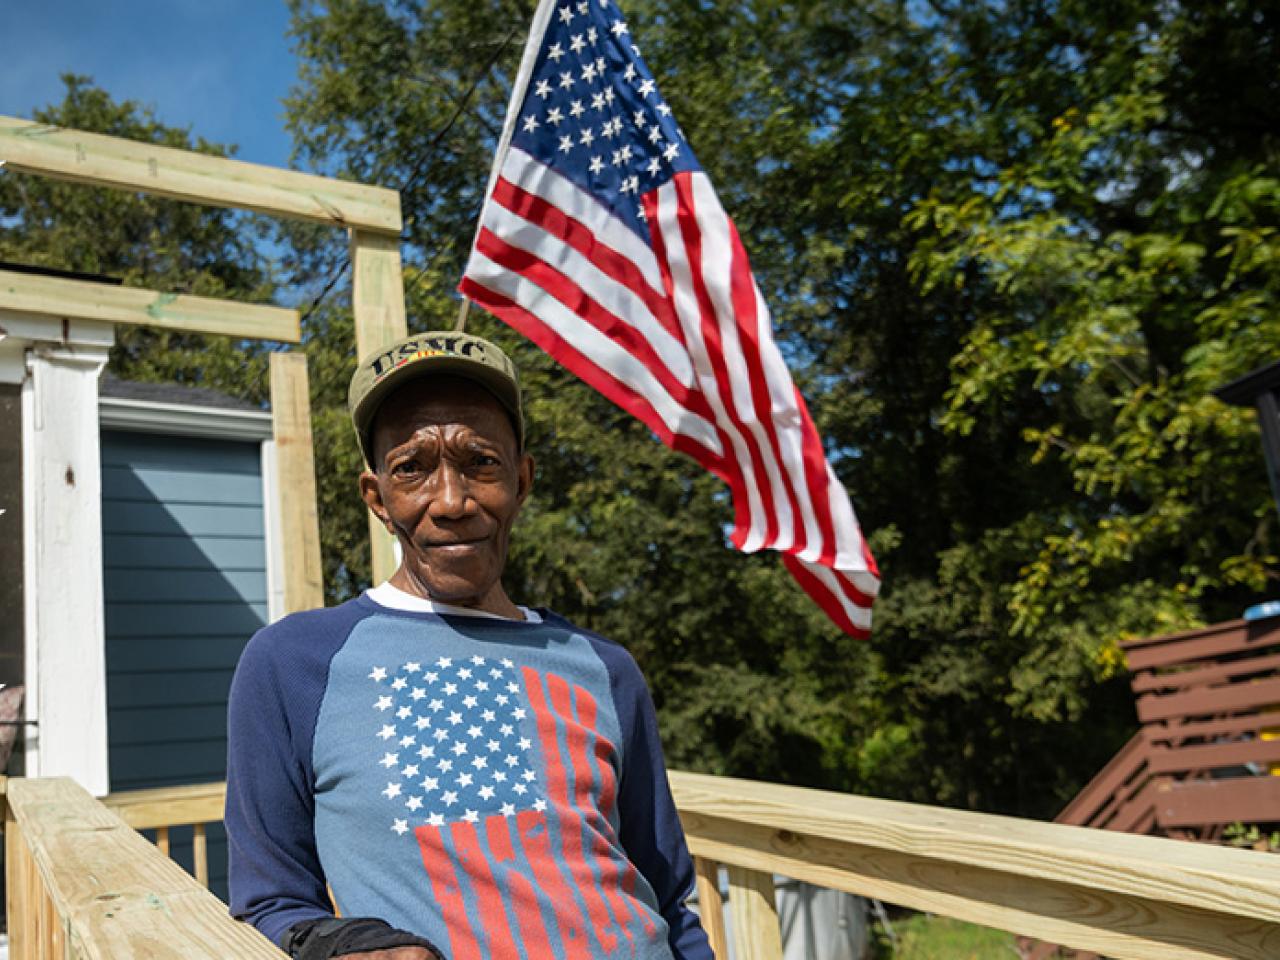 Operation Surprise: A Veteran shown in front of his home with an American flag waving in the background.